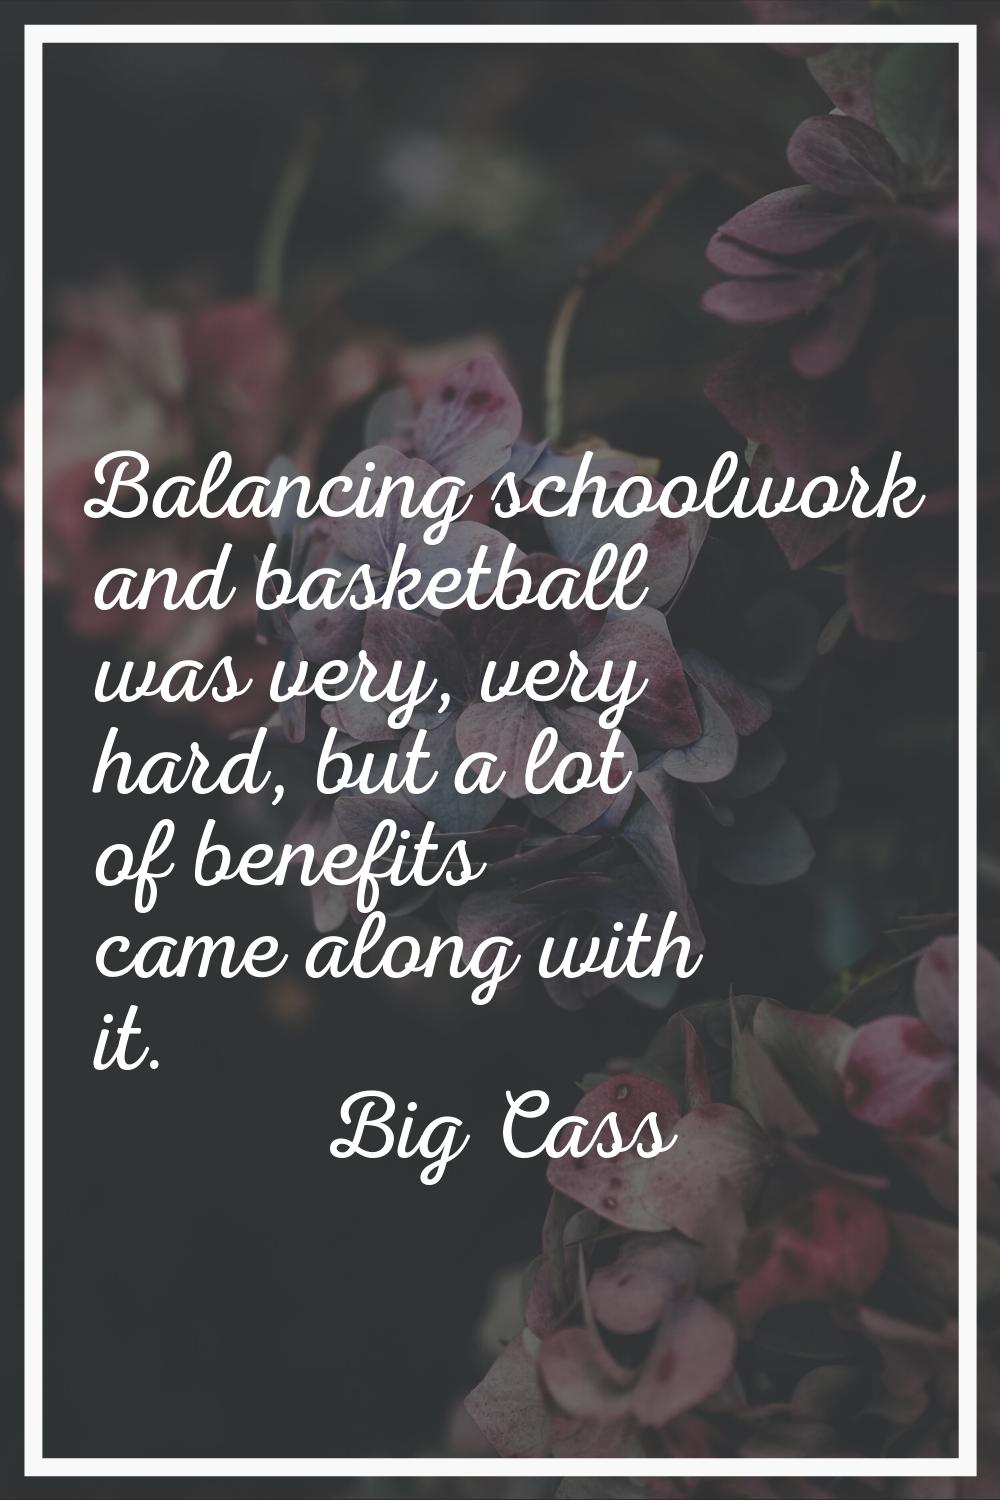 Balancing schoolwork and basketball was very, very hard, but a lot of benefits came along with it.